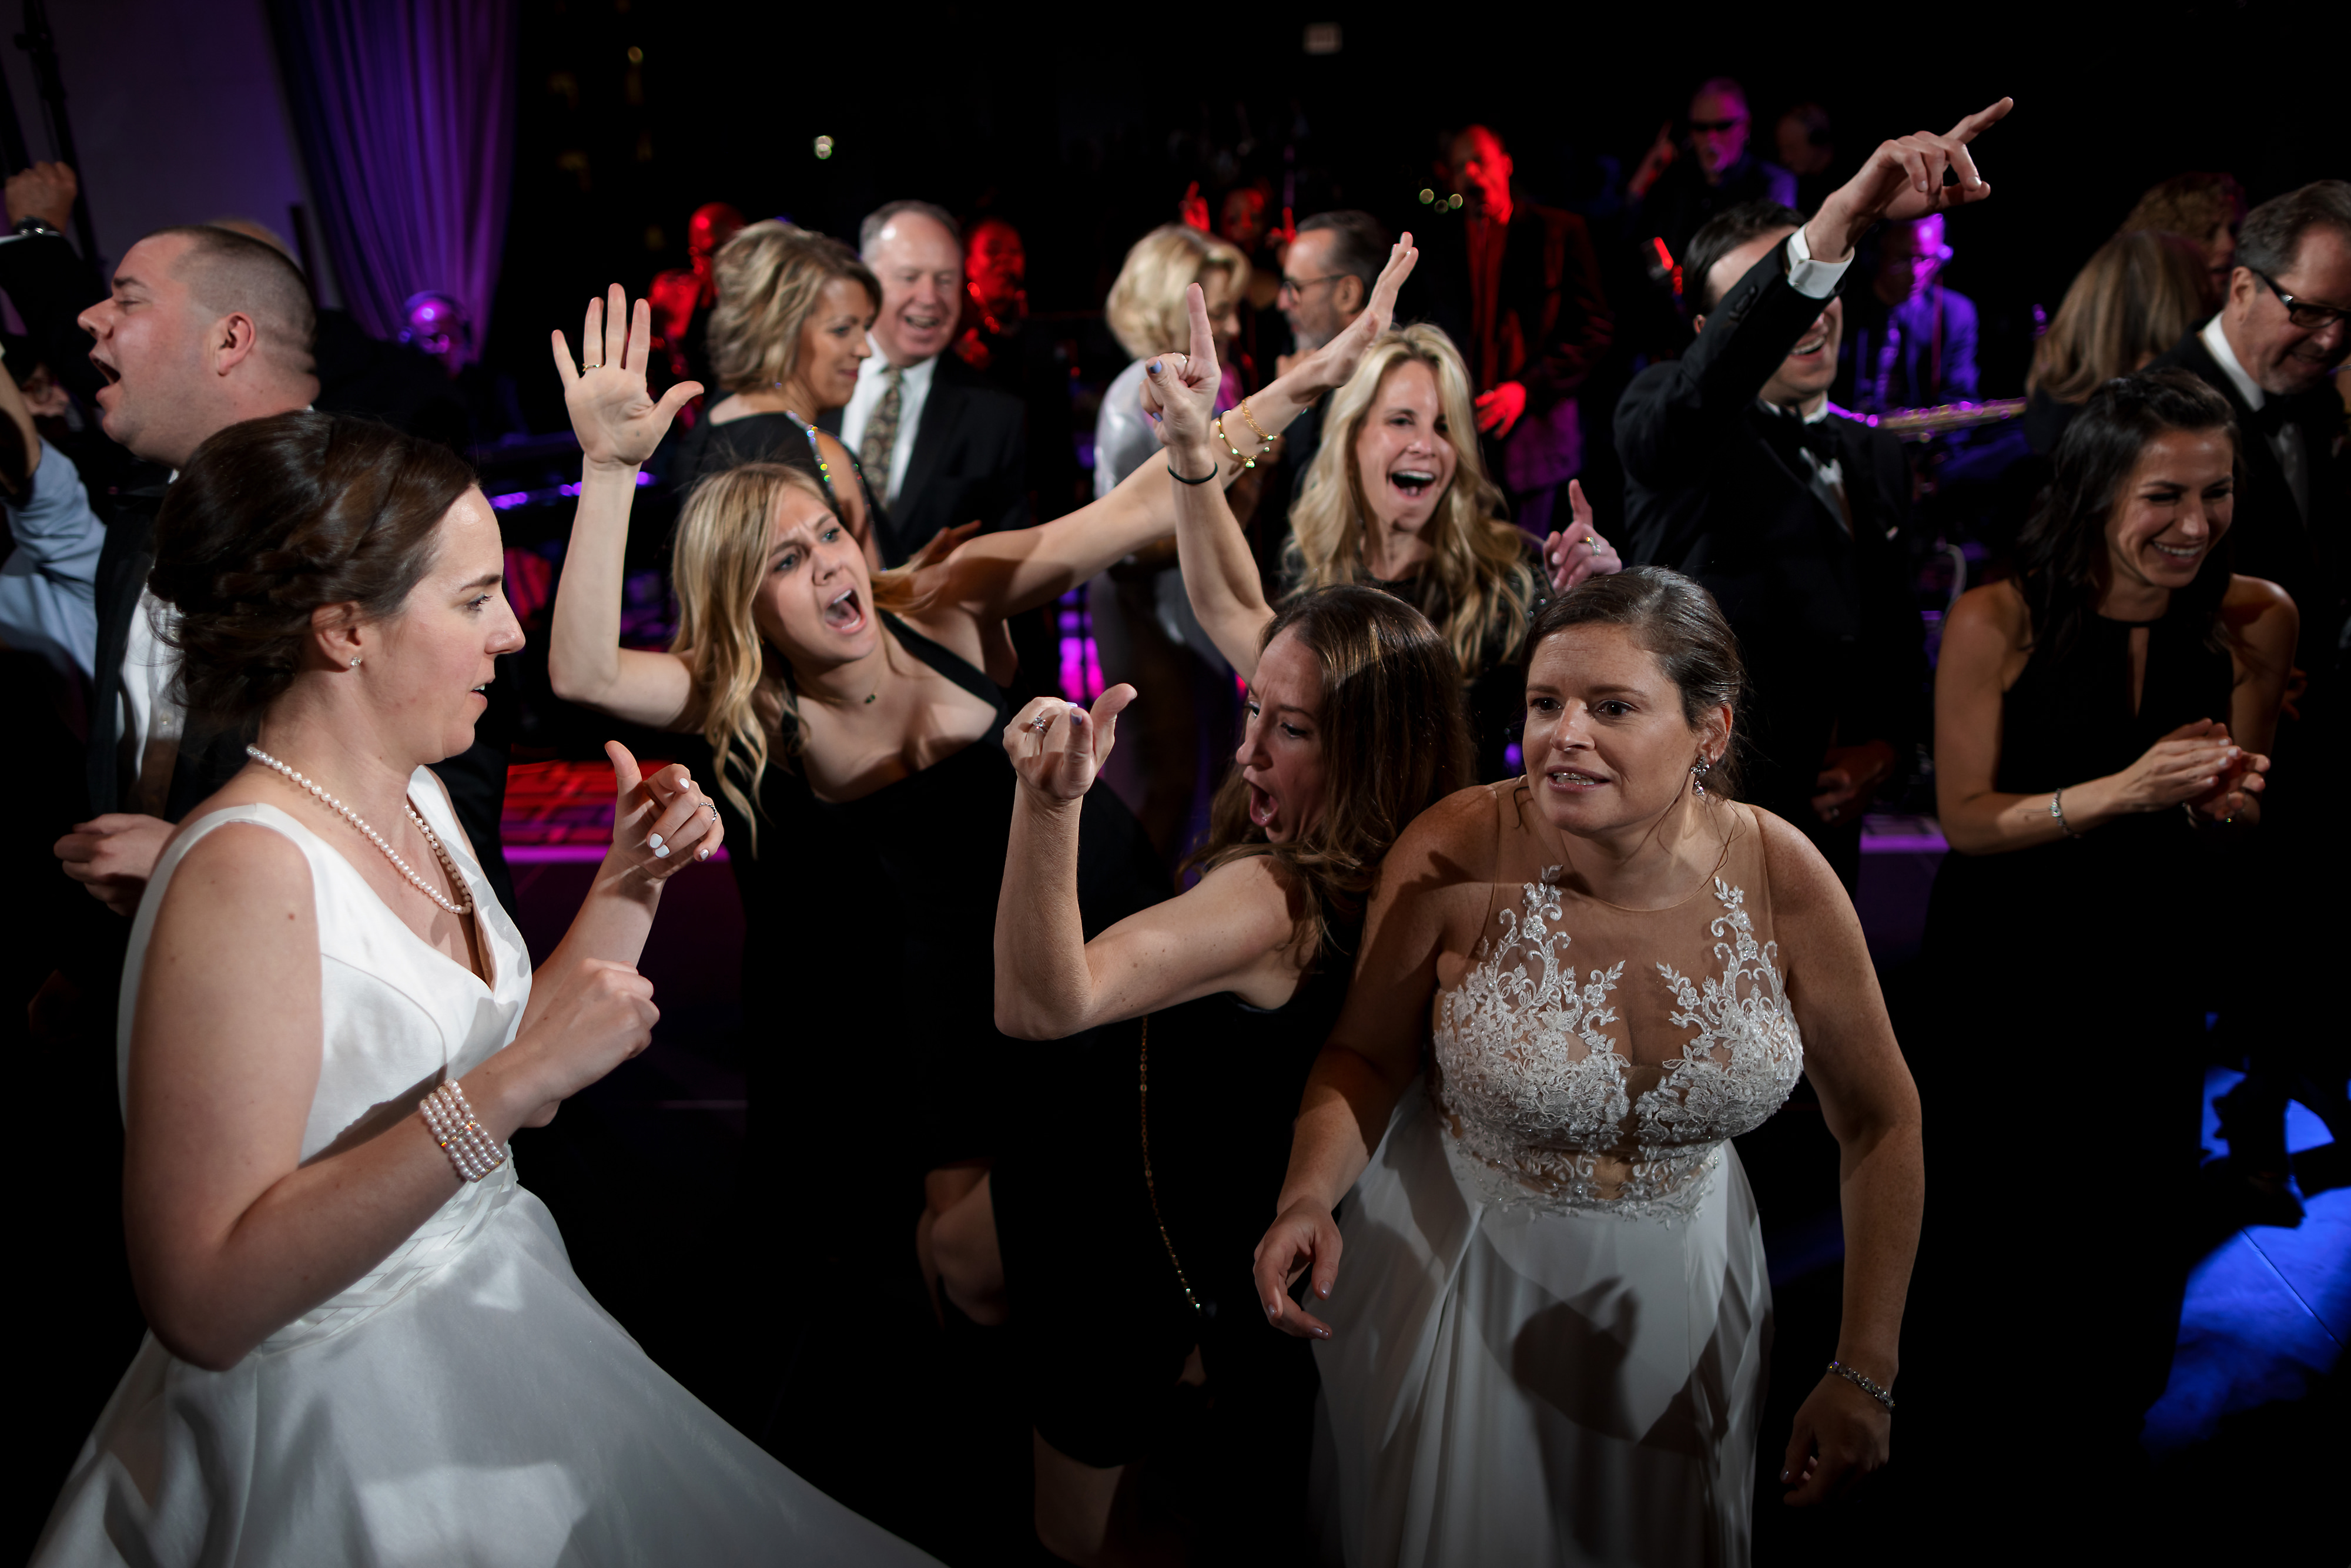 Wedding guests dance during wedding reception at The Langham Hotel in downtown Chicago